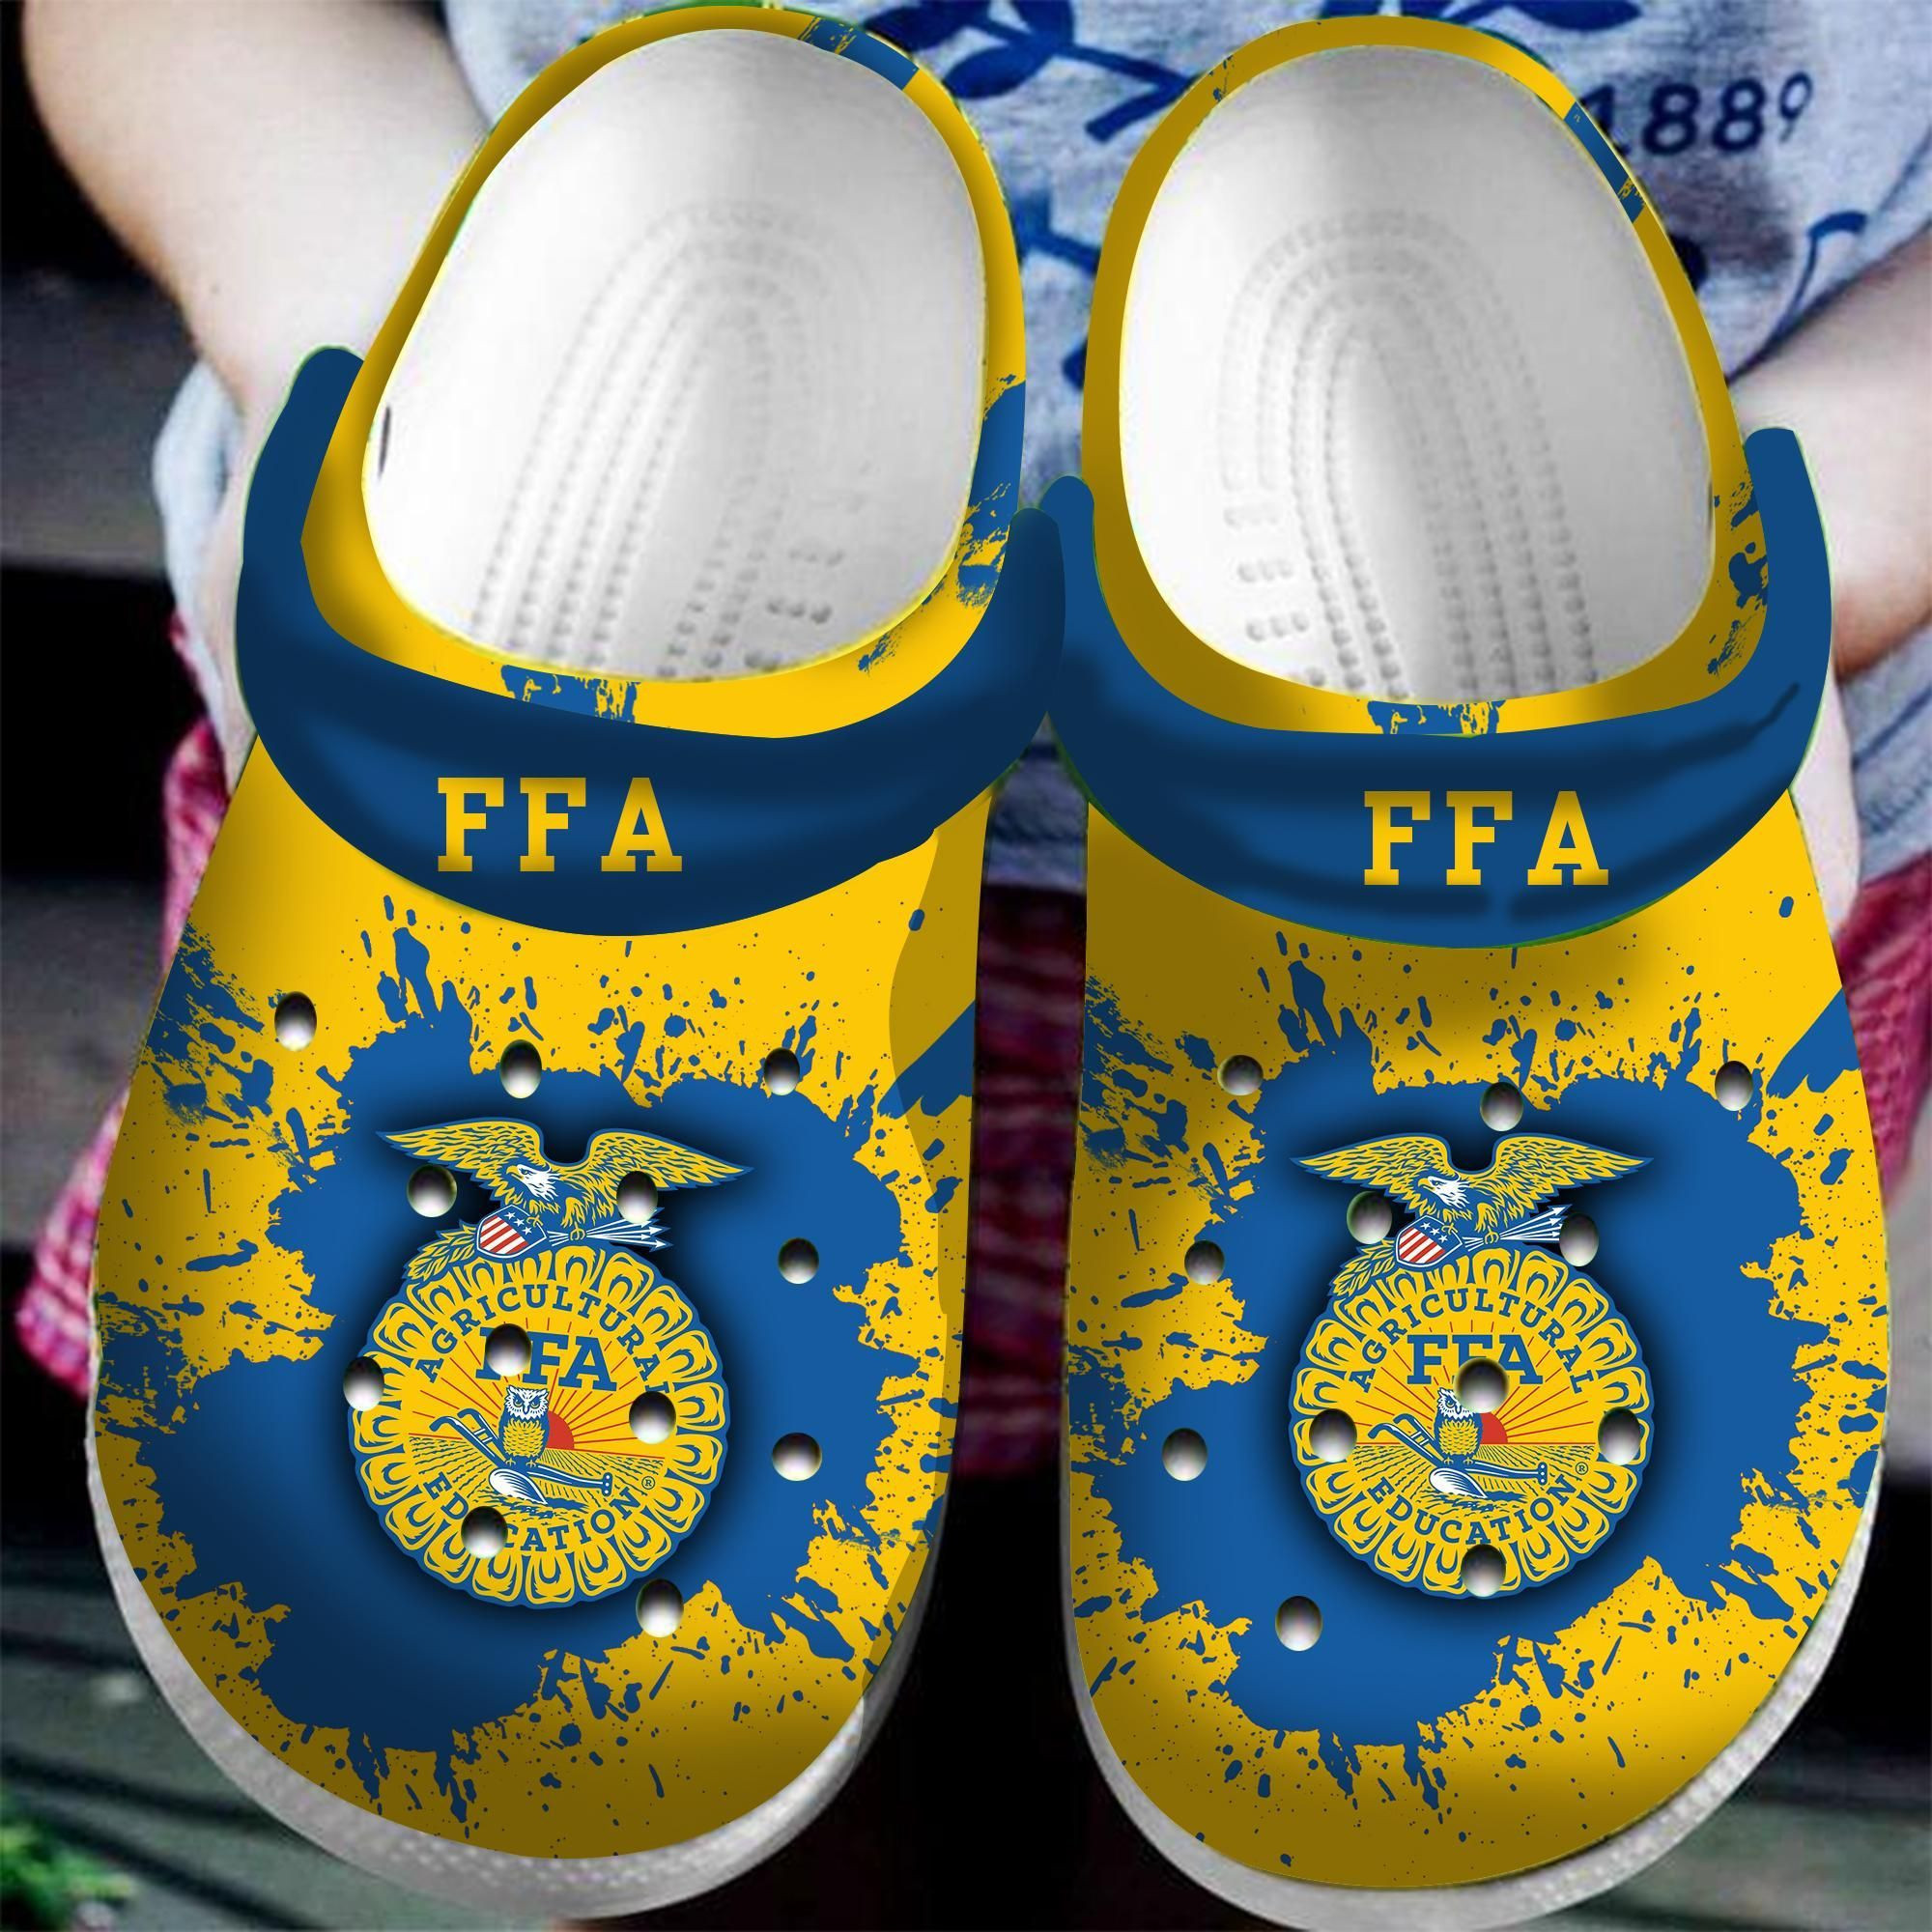 Agriculture Ffa Crocss Crocband Clog Comfortable Water Shoes In Navy Yellow